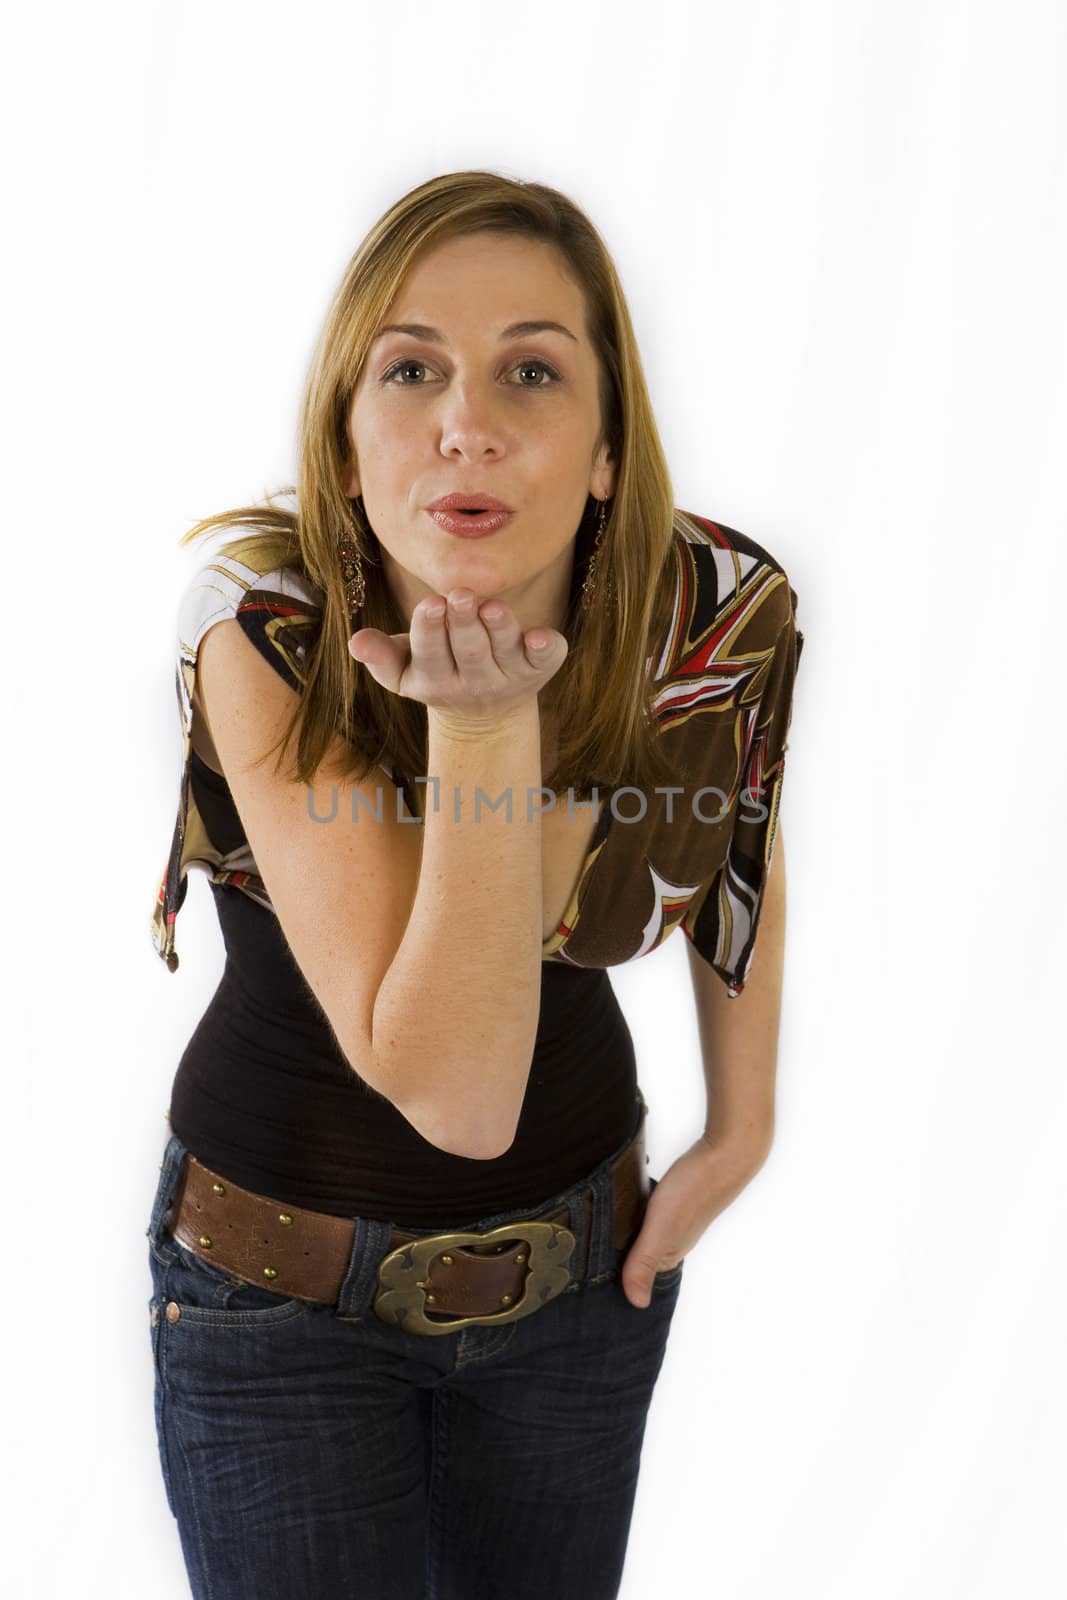 Beautiful young woman blowing kisses against white background